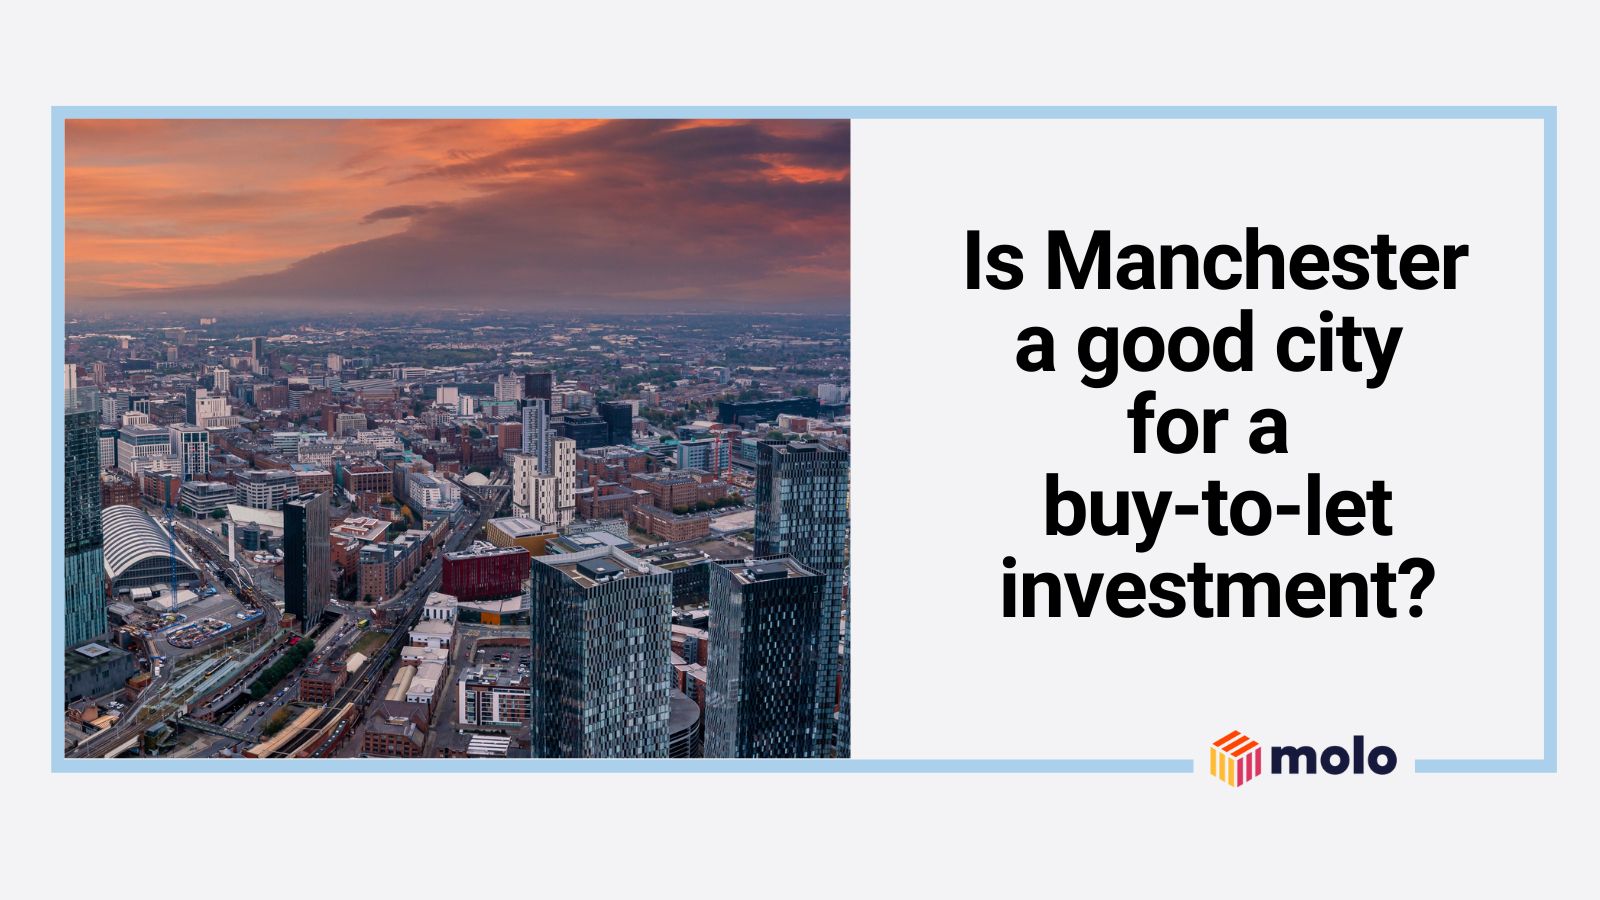 Is Manchester still a good city for a buy-to-let investment